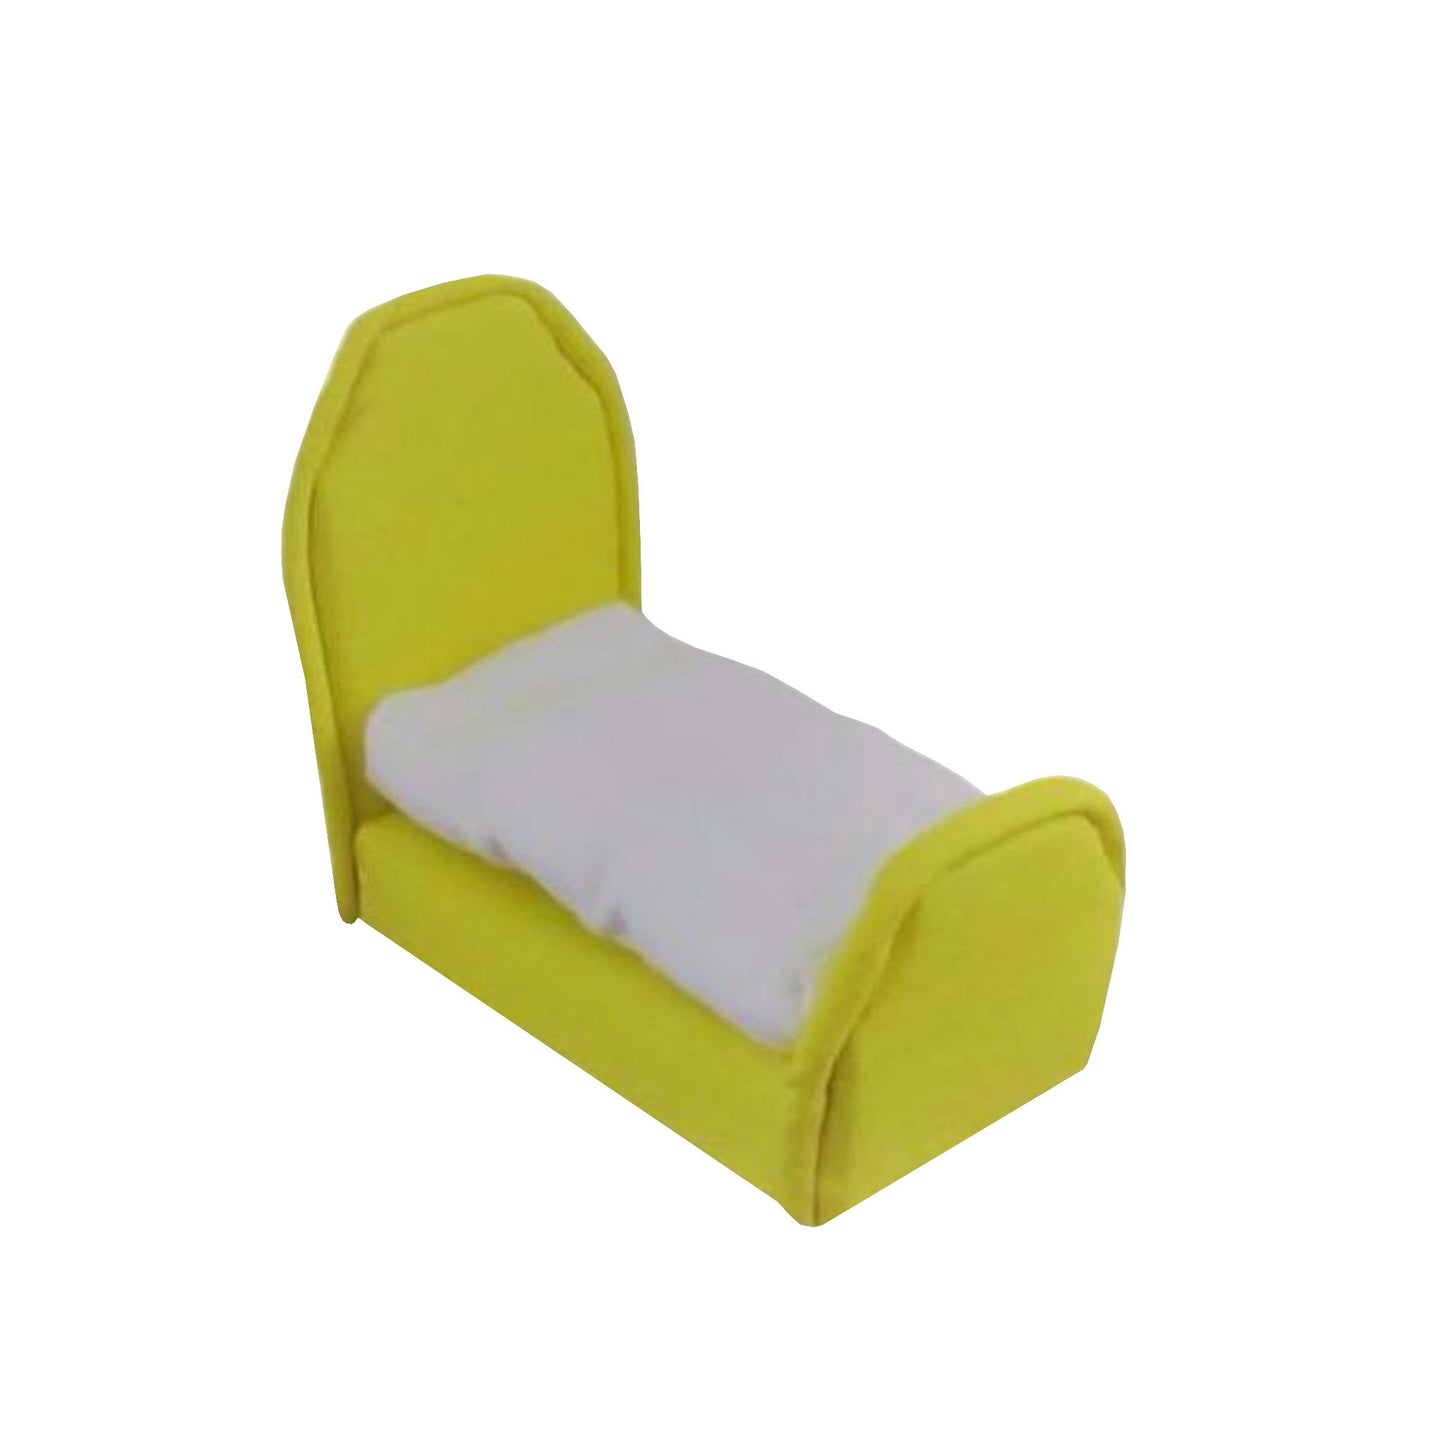 Upholstered Bright Yellow Doll Bed for 3-inch dolls